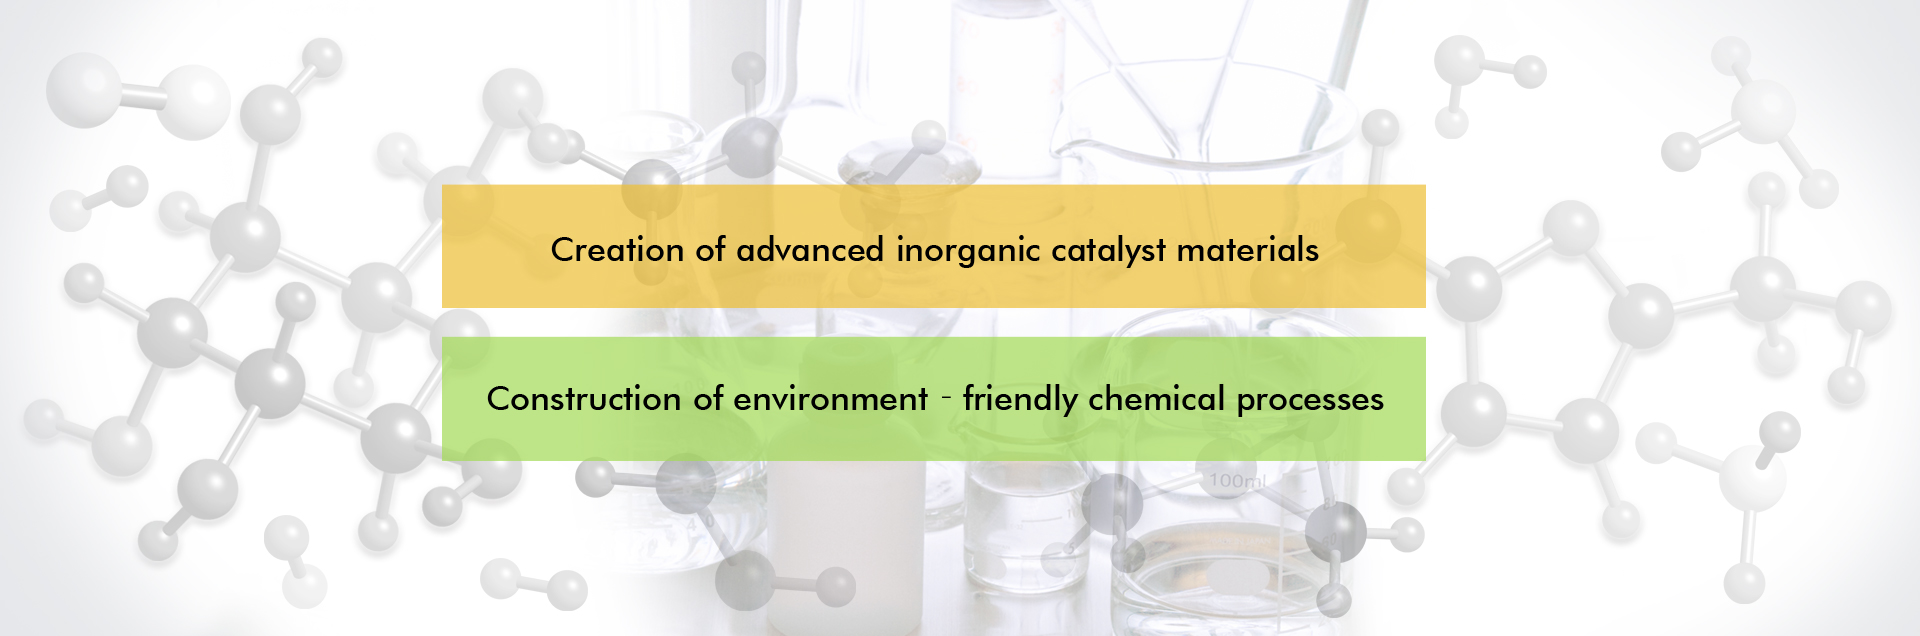 Creation of advanced inorganic catalyst materials, Construction of environment‐friendly chemical processes